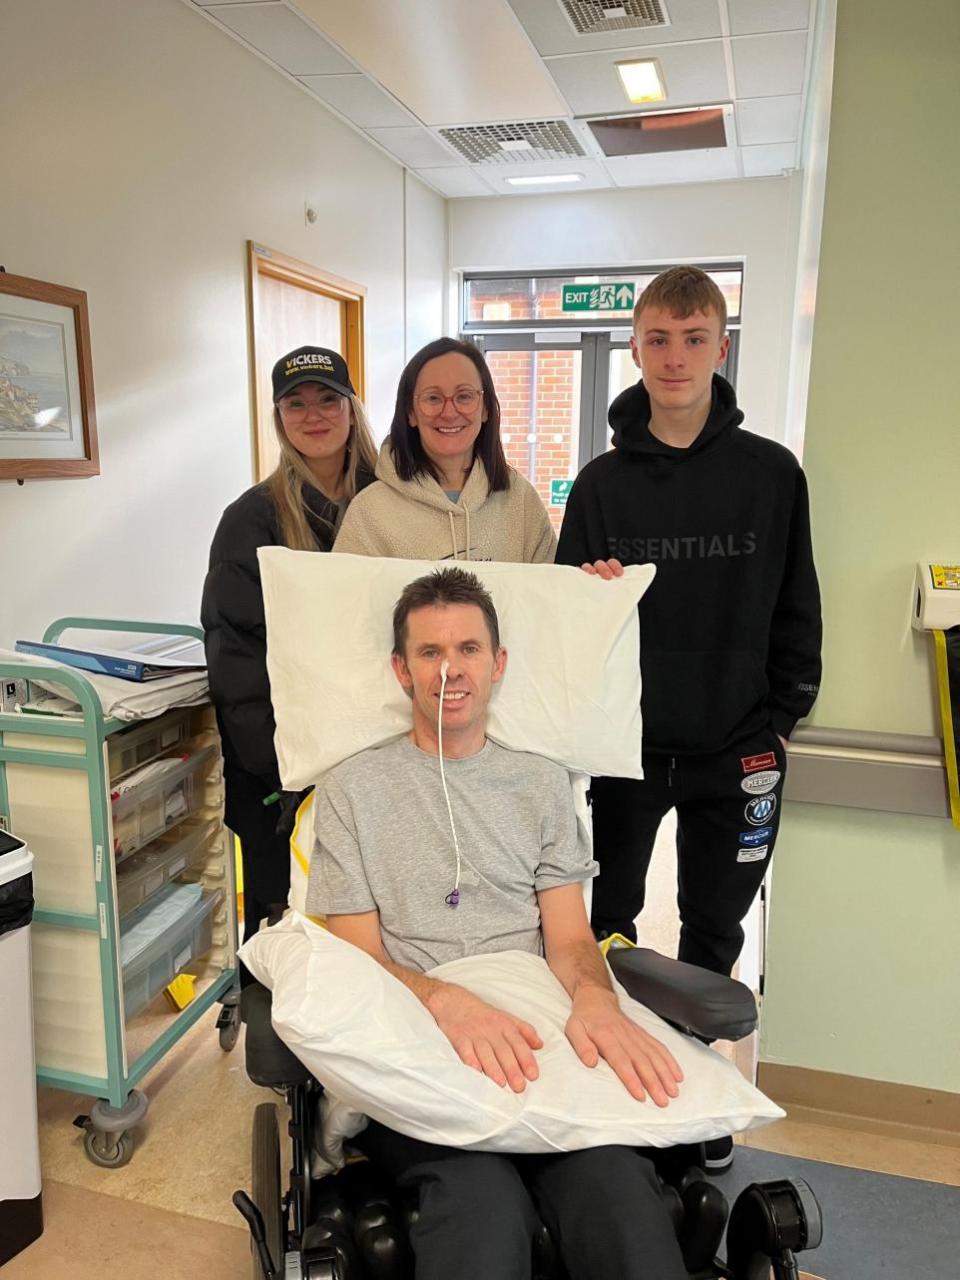 The Northern Echo: Graham after his accident, surrounded by his supportive family